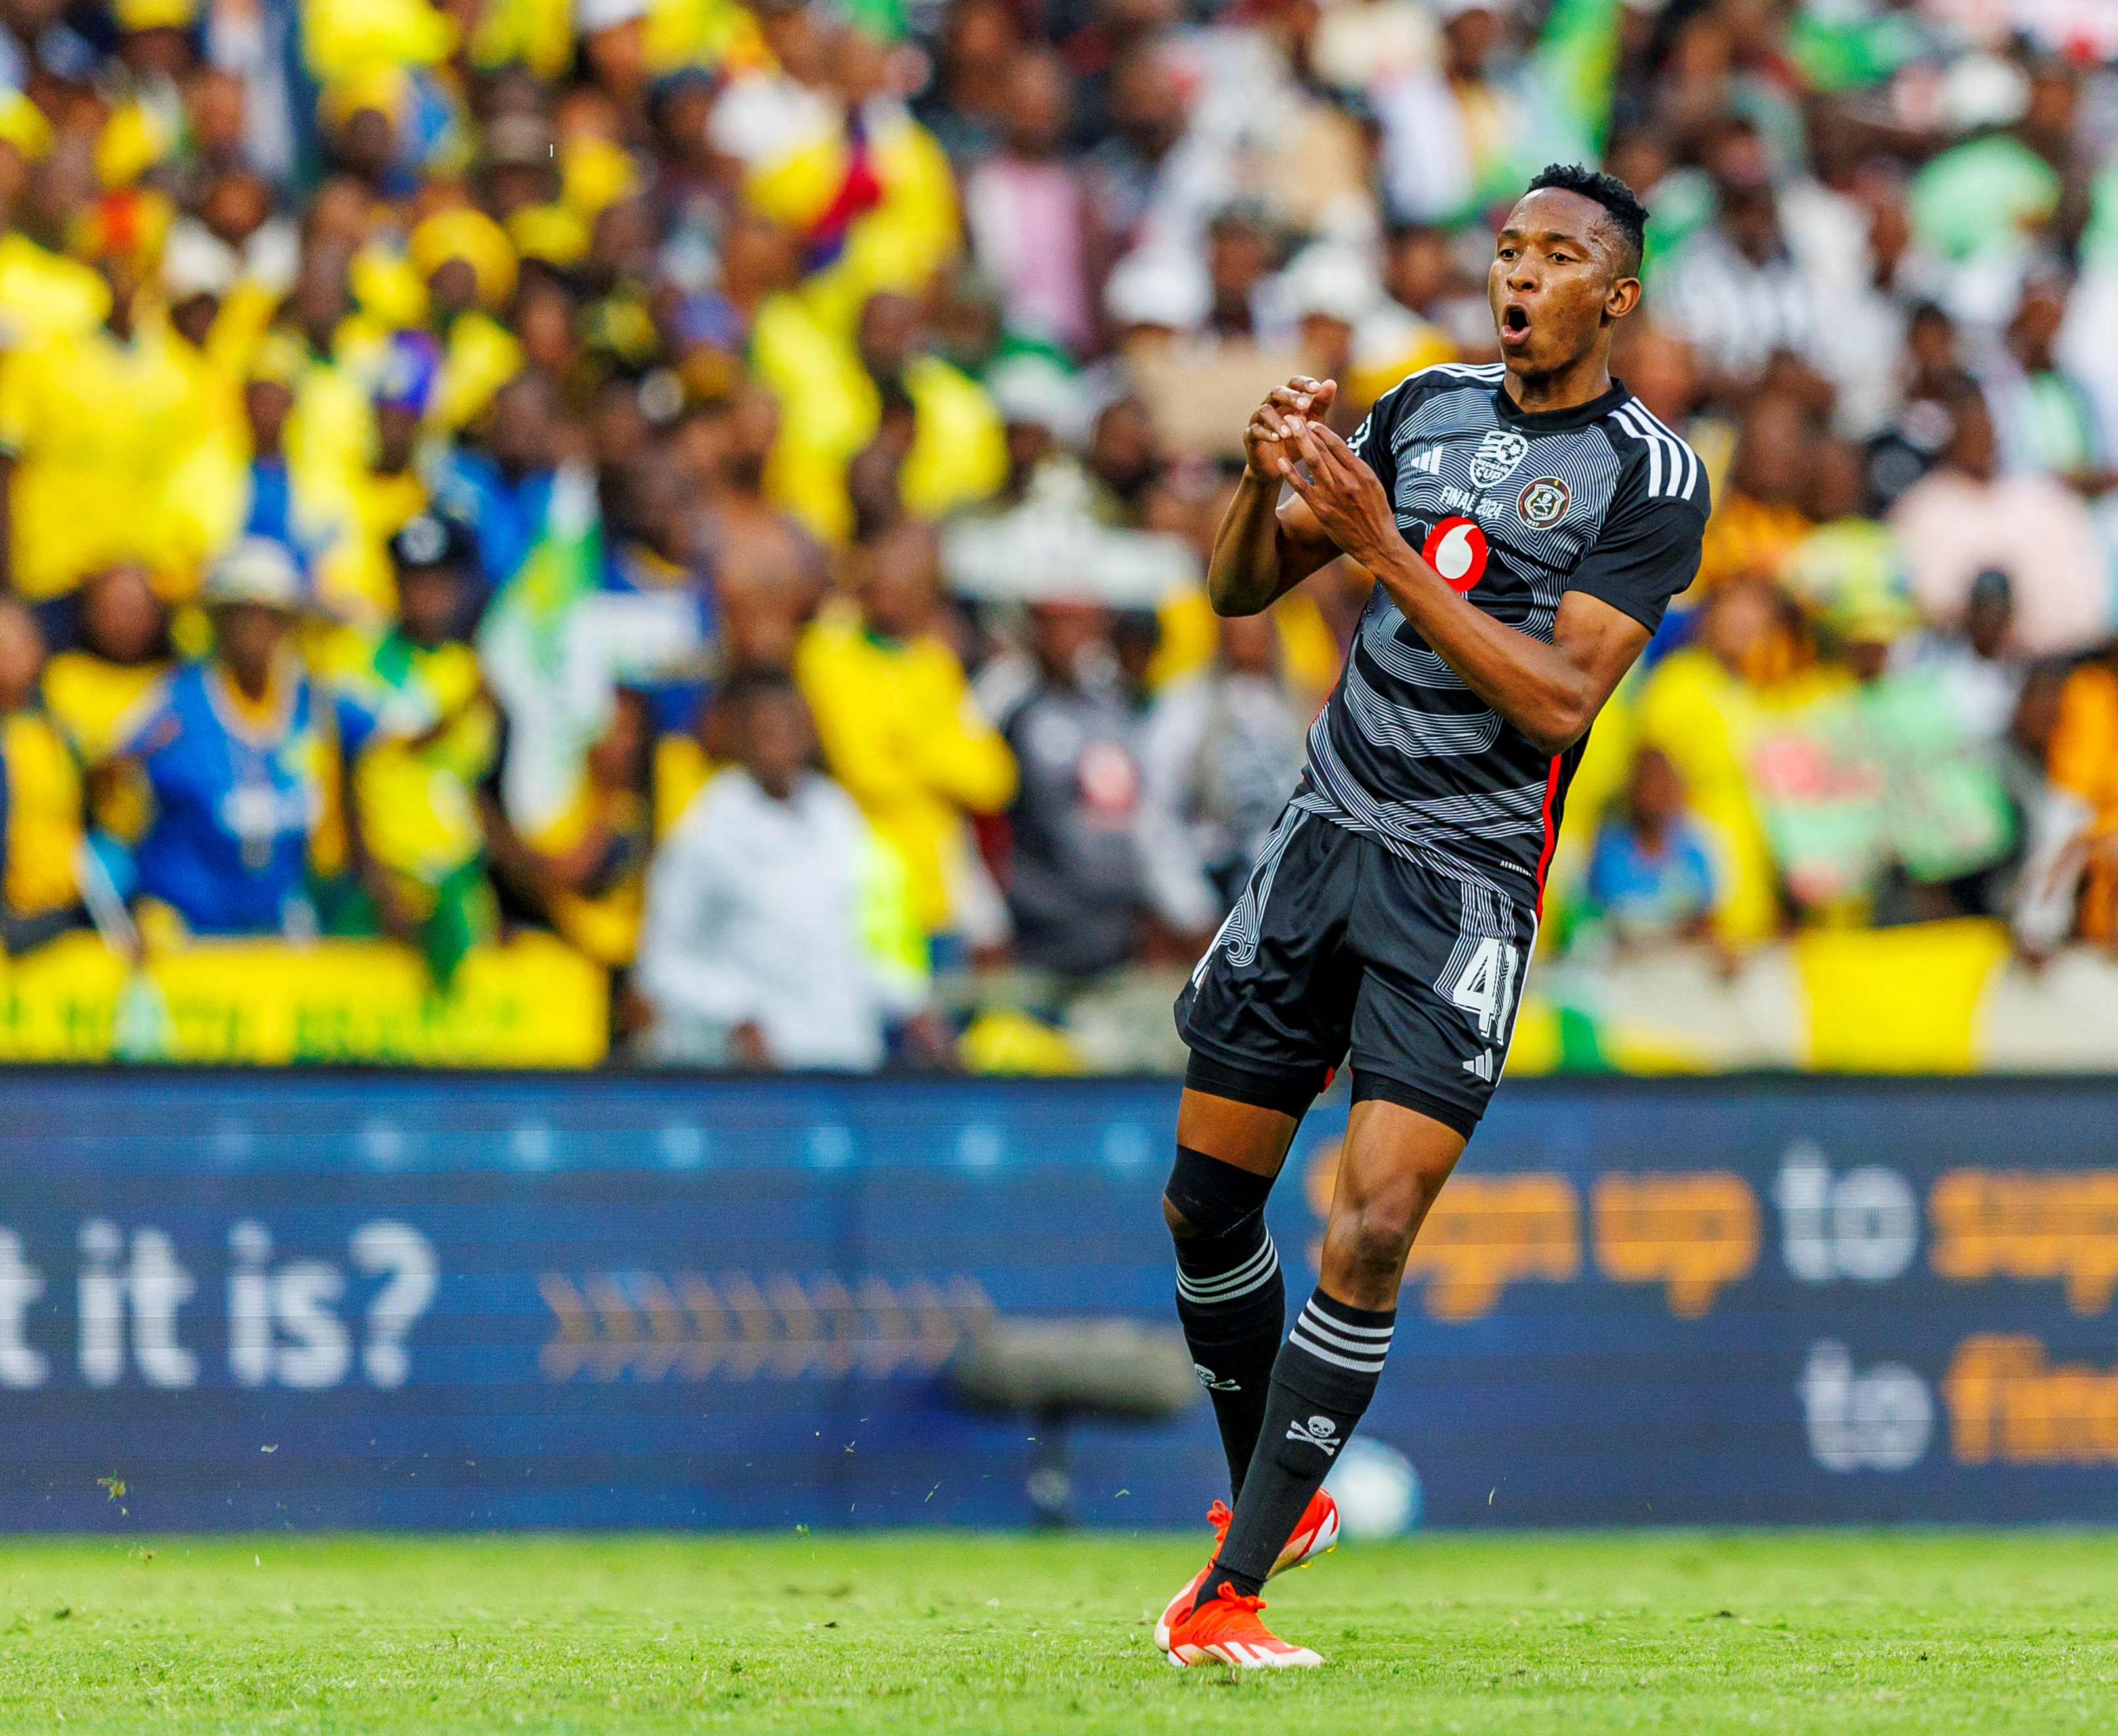 Pirates star: When I had the ball, they were scared